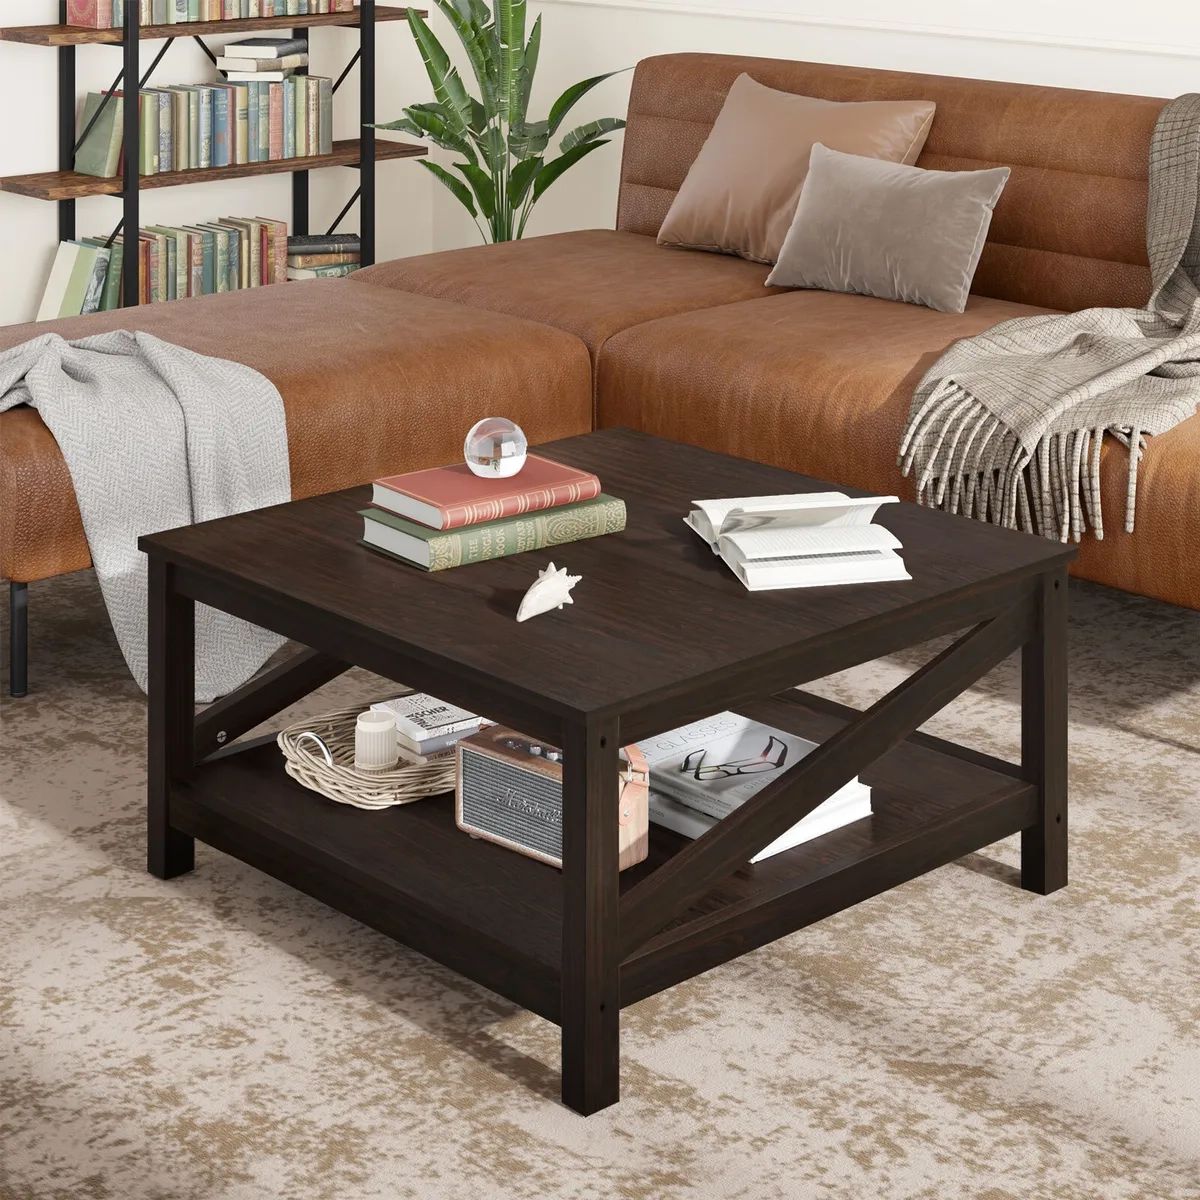 2 Tier Wood Square Coffee Table Farmhouse Cocktail Table With Storage  Shelves | Ebay Regarding Wood Coffee Tables With 2 Tier Storage (Photo 13 of 15)